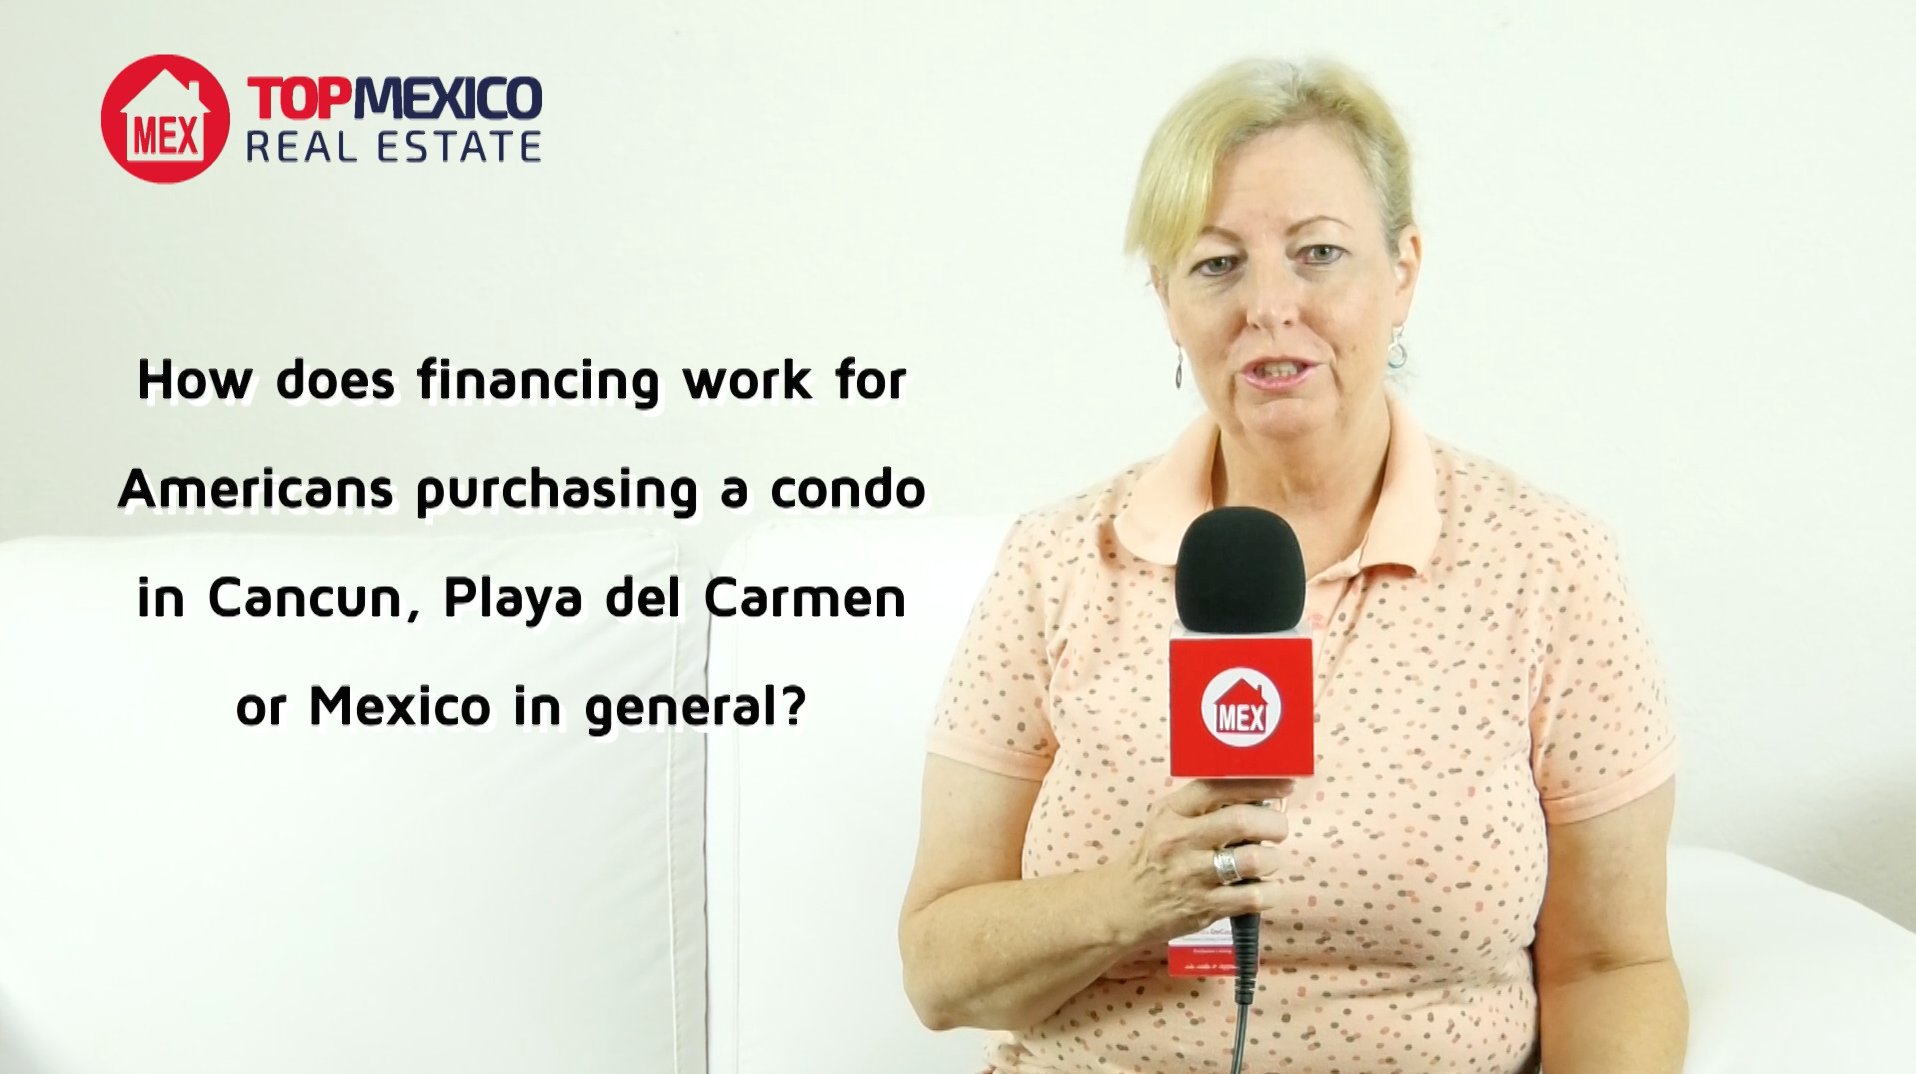 Real Estate Financing for Americans in Mexico